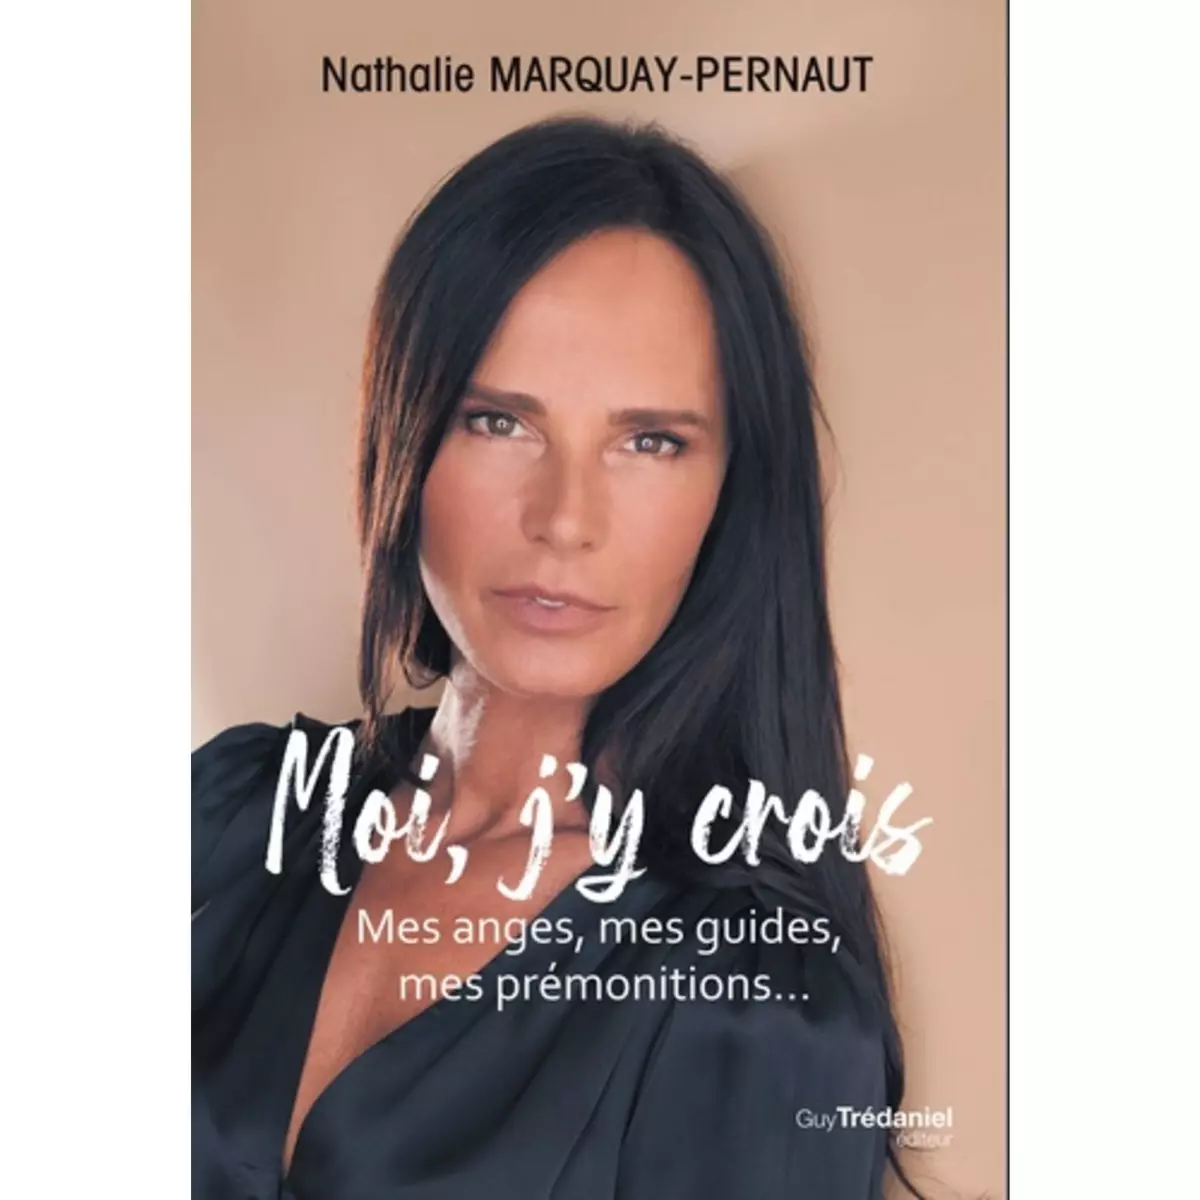  MOI, J'Y CROIS. MES ANGES, MES GUIDES, MES PREMONITIONS..., Marquay-Pernaut Nathalie